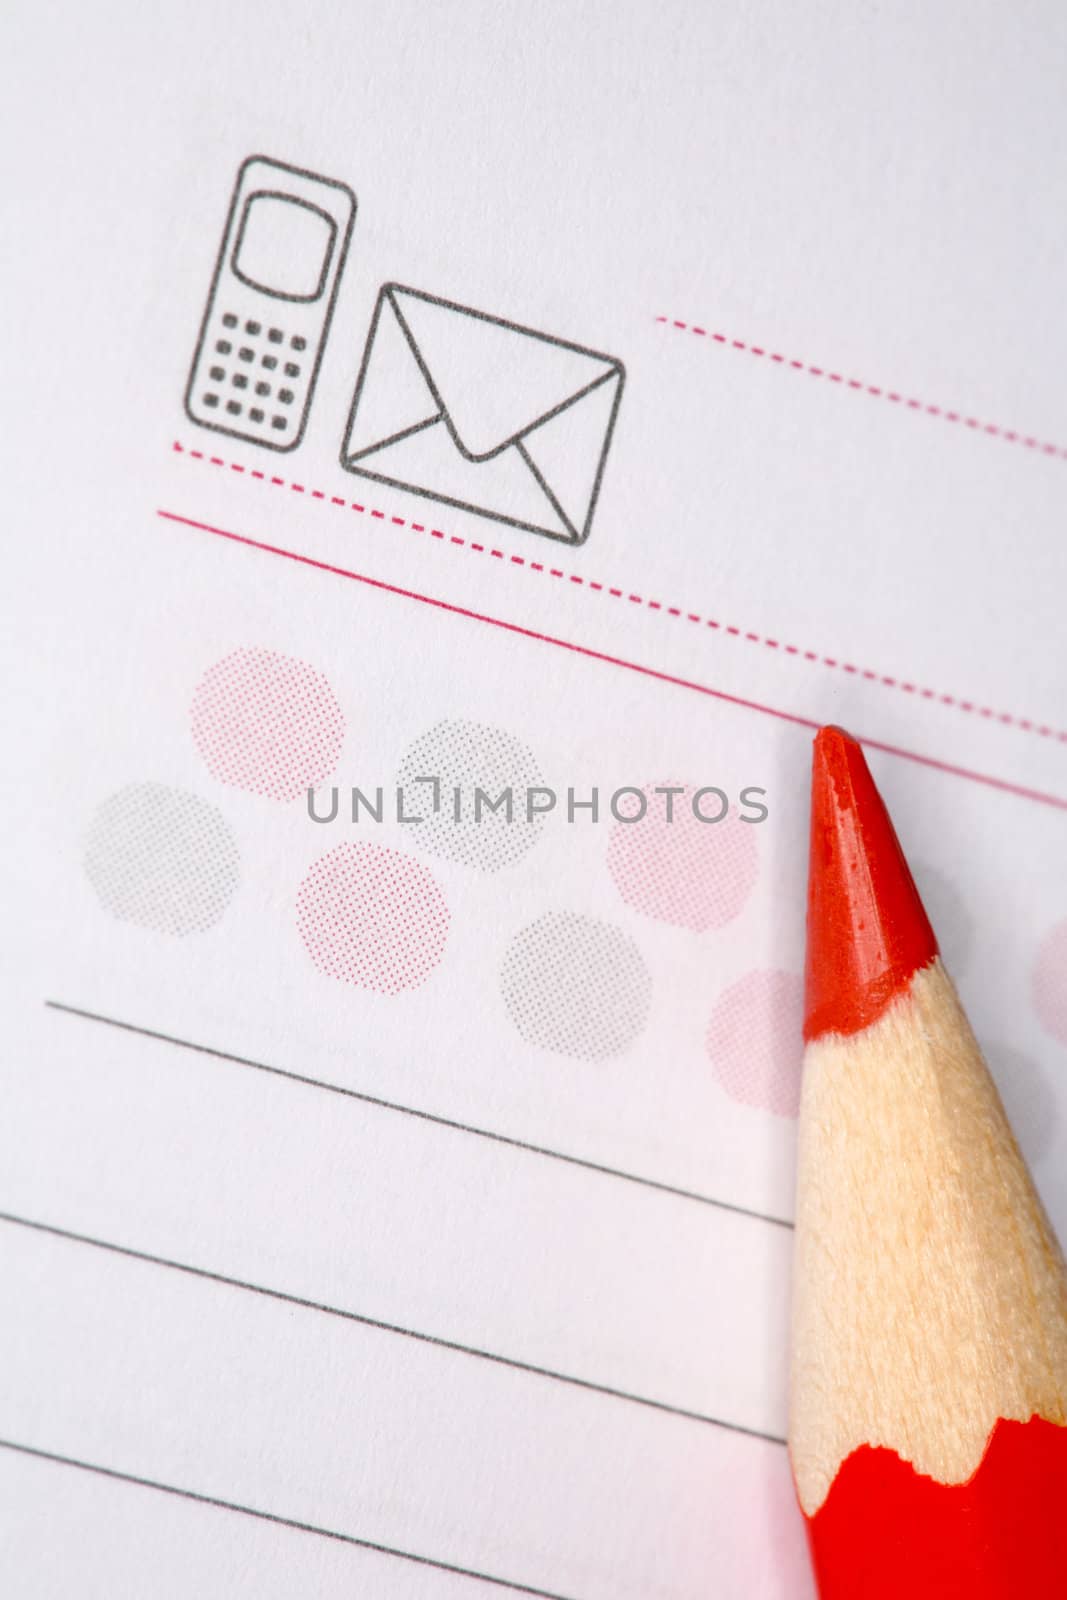 Closeup image of red pencil laying on notepad